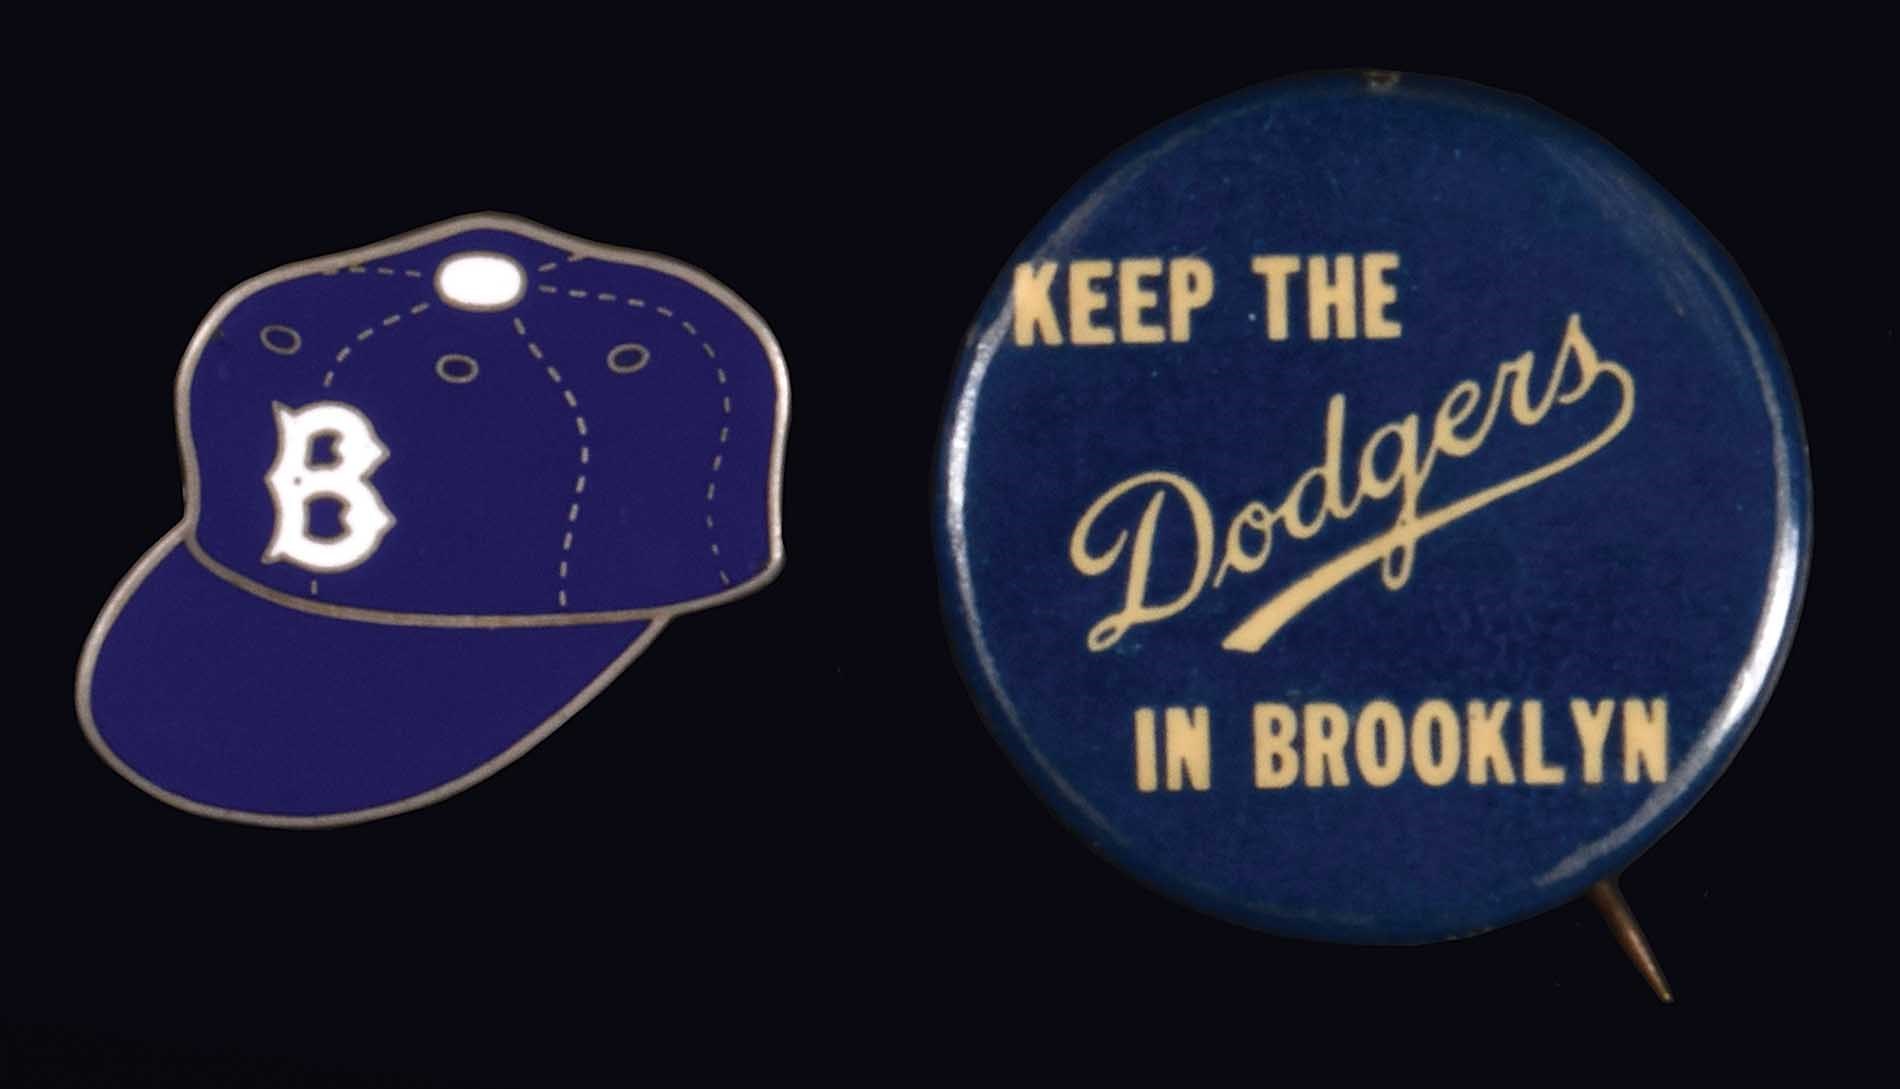 Pins of the 1955 Brooklyn Dodgers